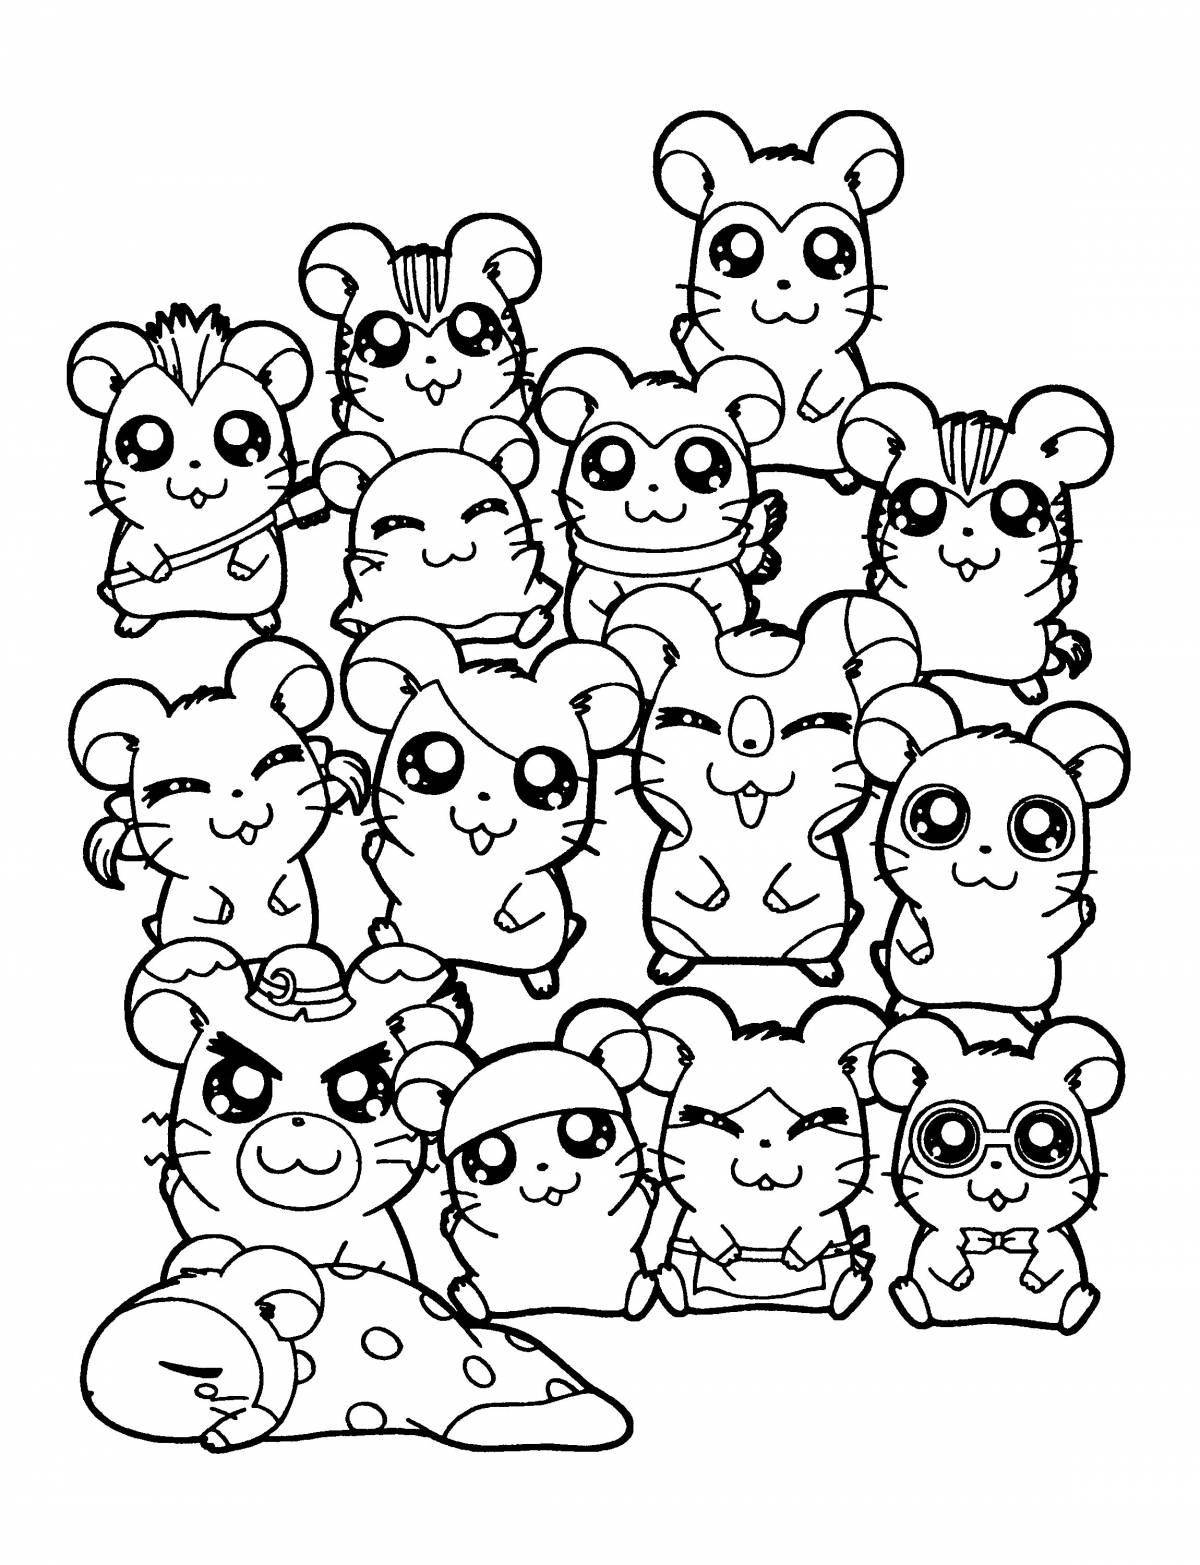 Coloring pages animals